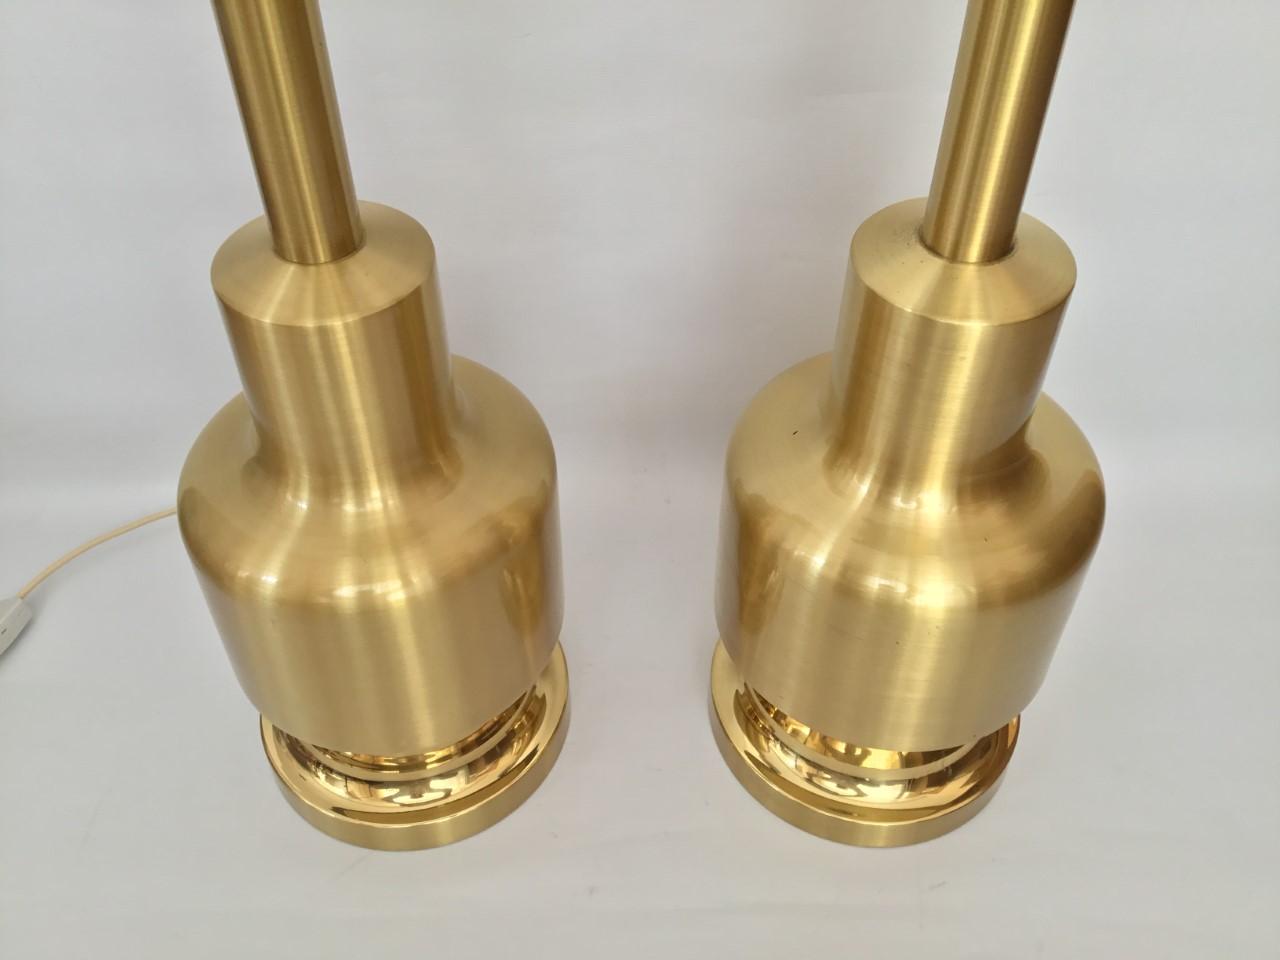 Large Pair of Midcentury Golden Brass Spanish Table Lamps by Clar, 1970s For Sale 1